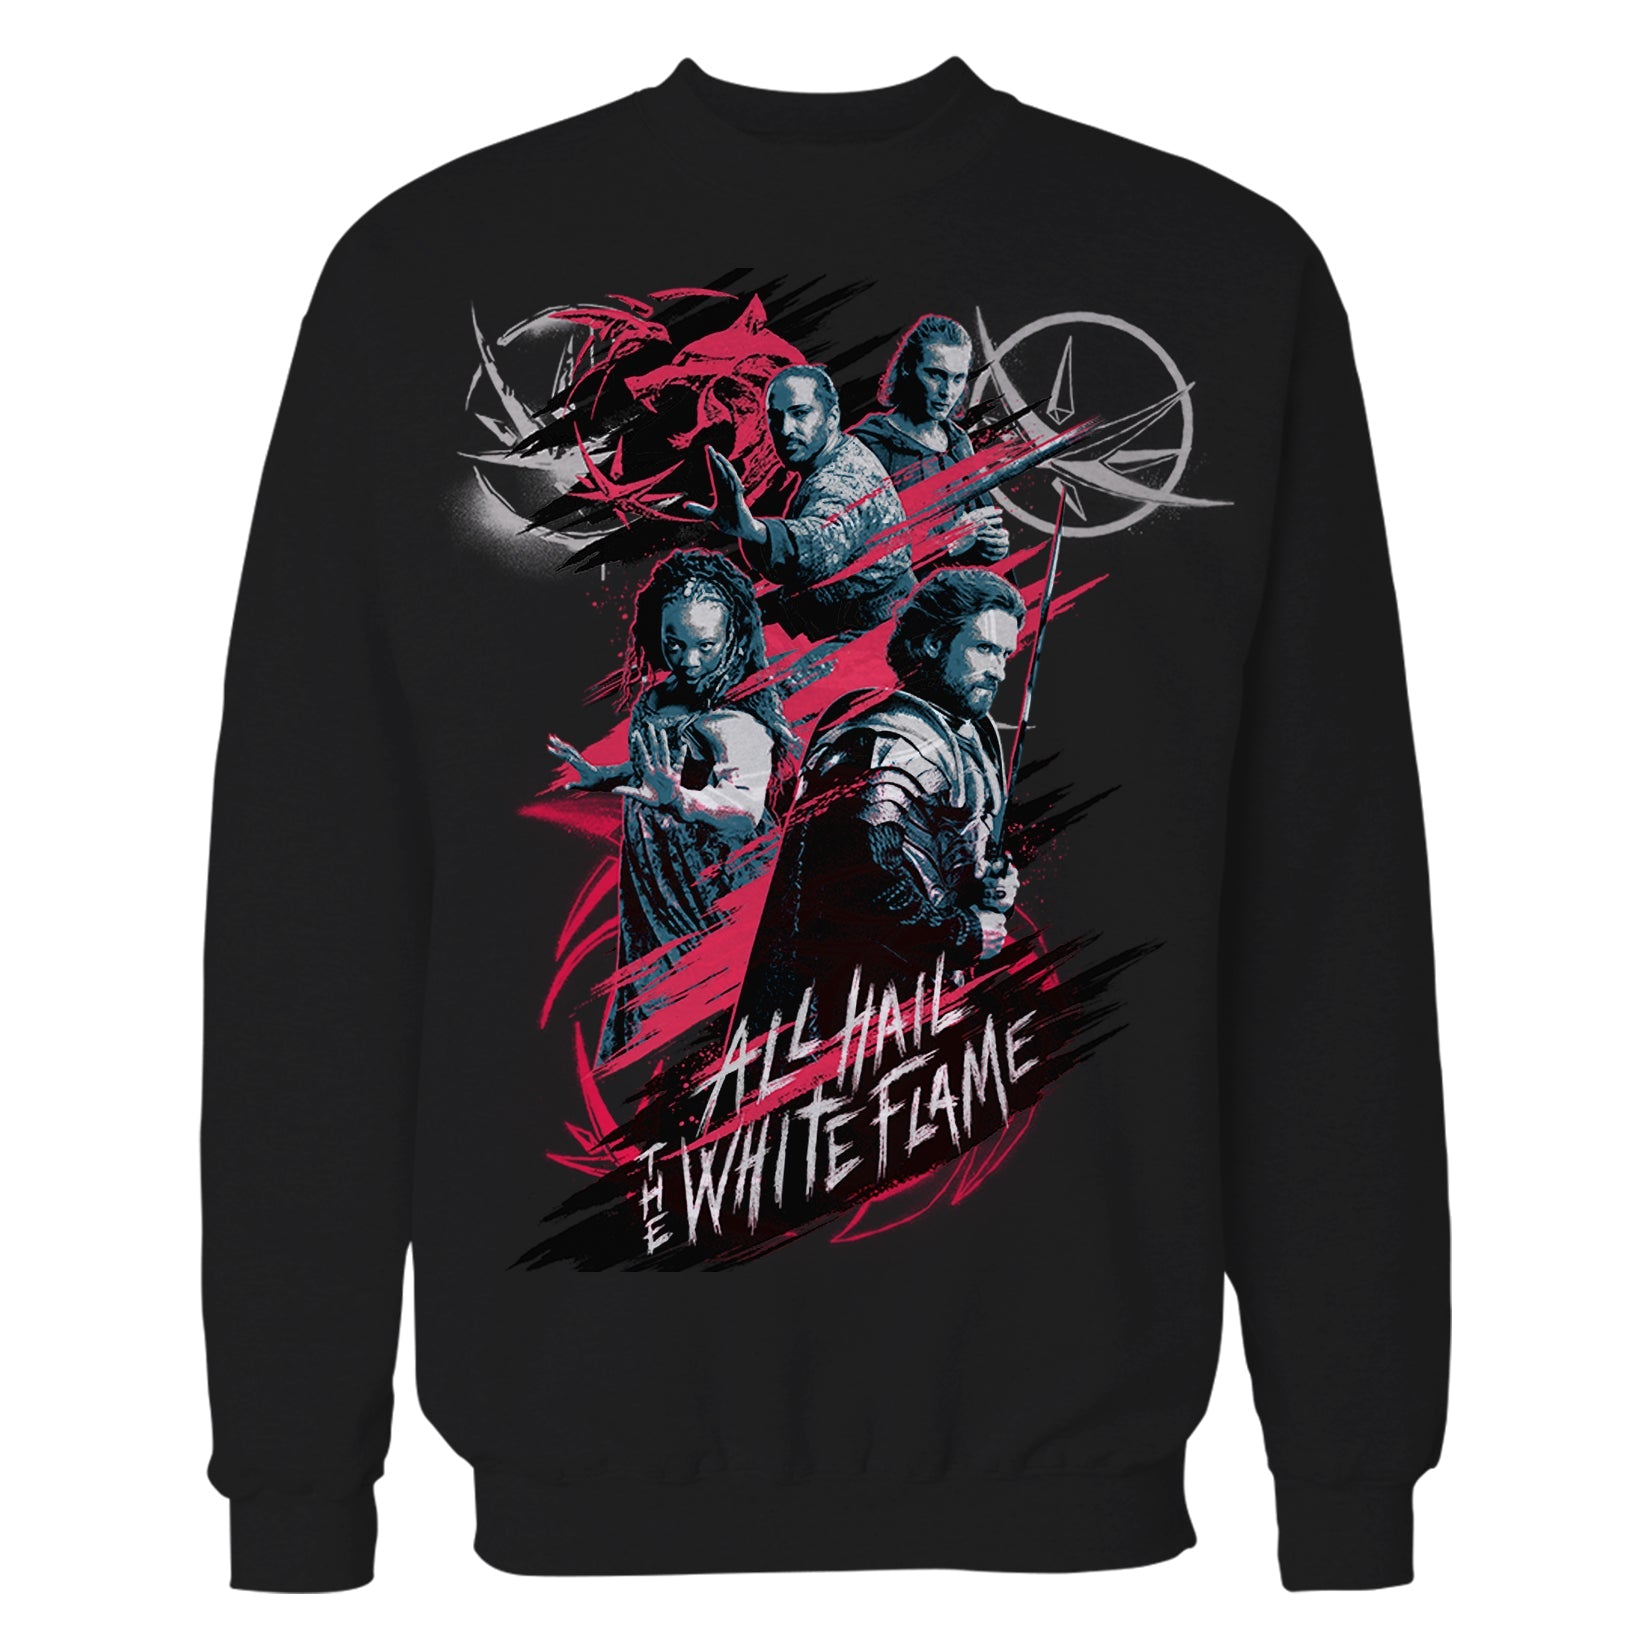 The Witcher Splash White Flame Official Sweatshirt